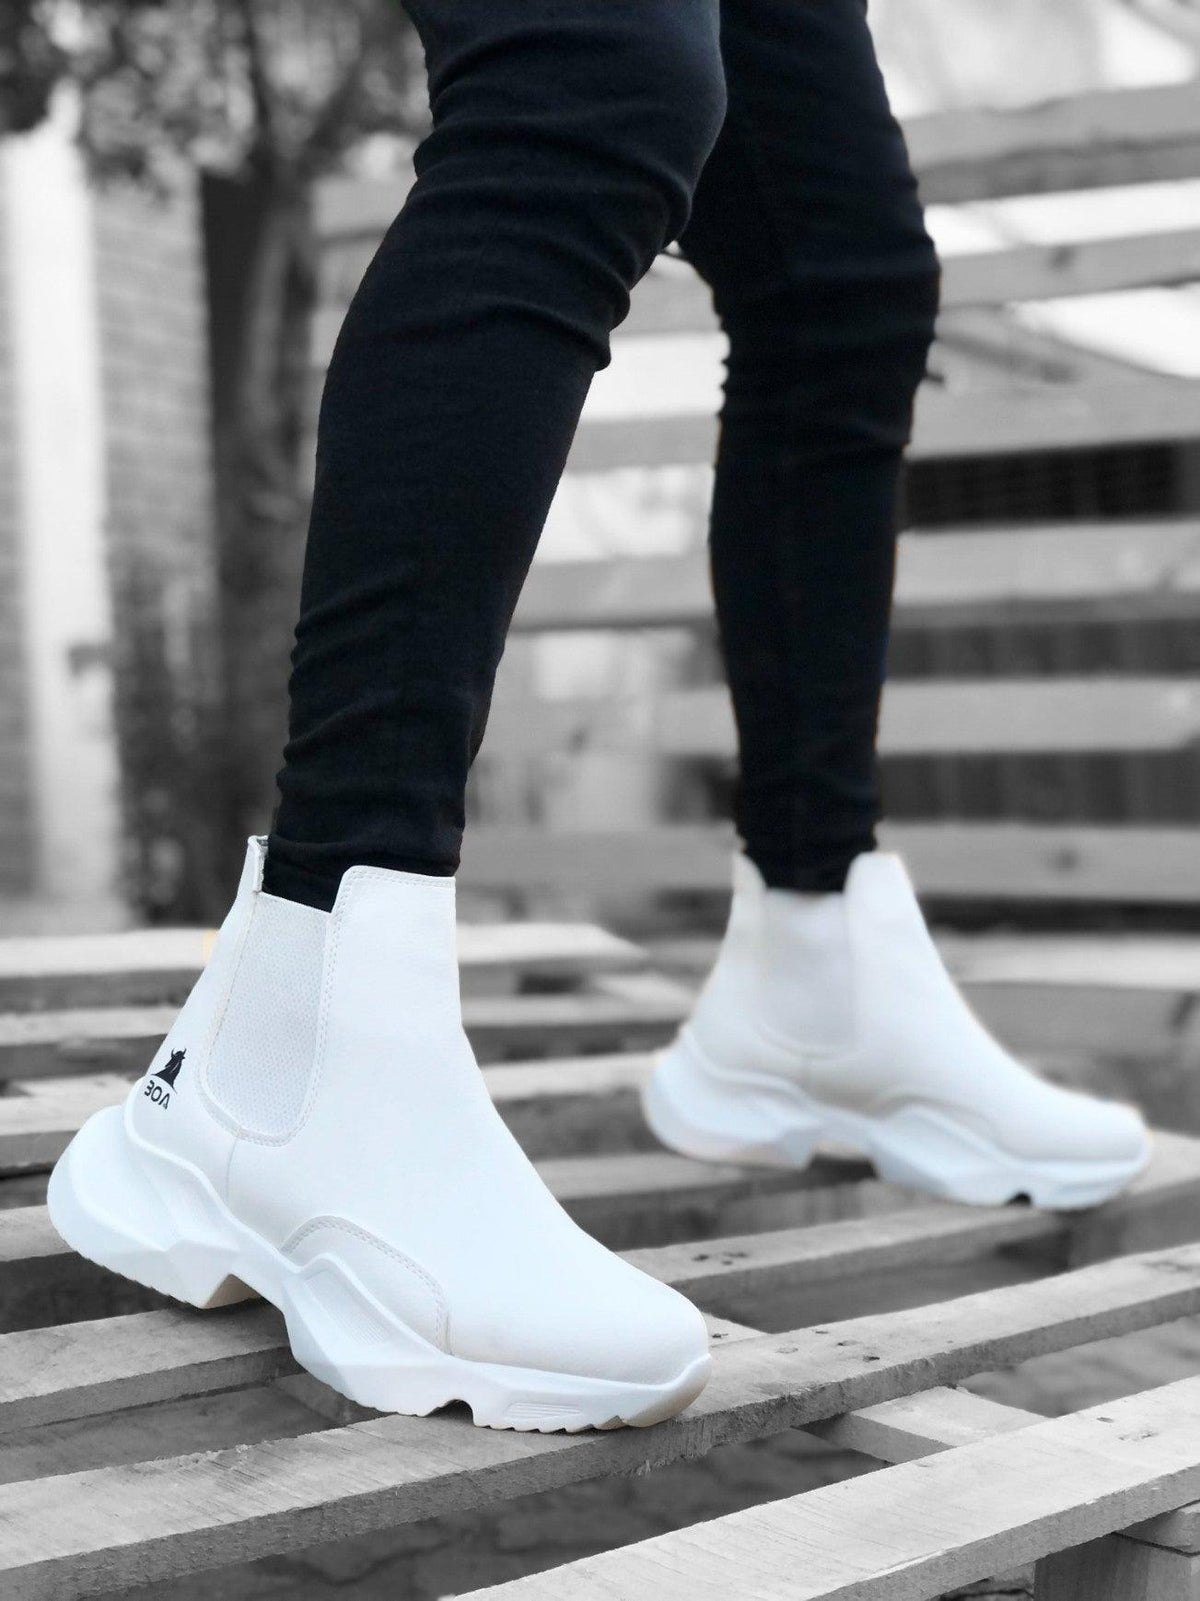 BA0444 Lace-Up Comfortable High Sole White Men's Sports Half Ankle Boots - STREET MODE ™